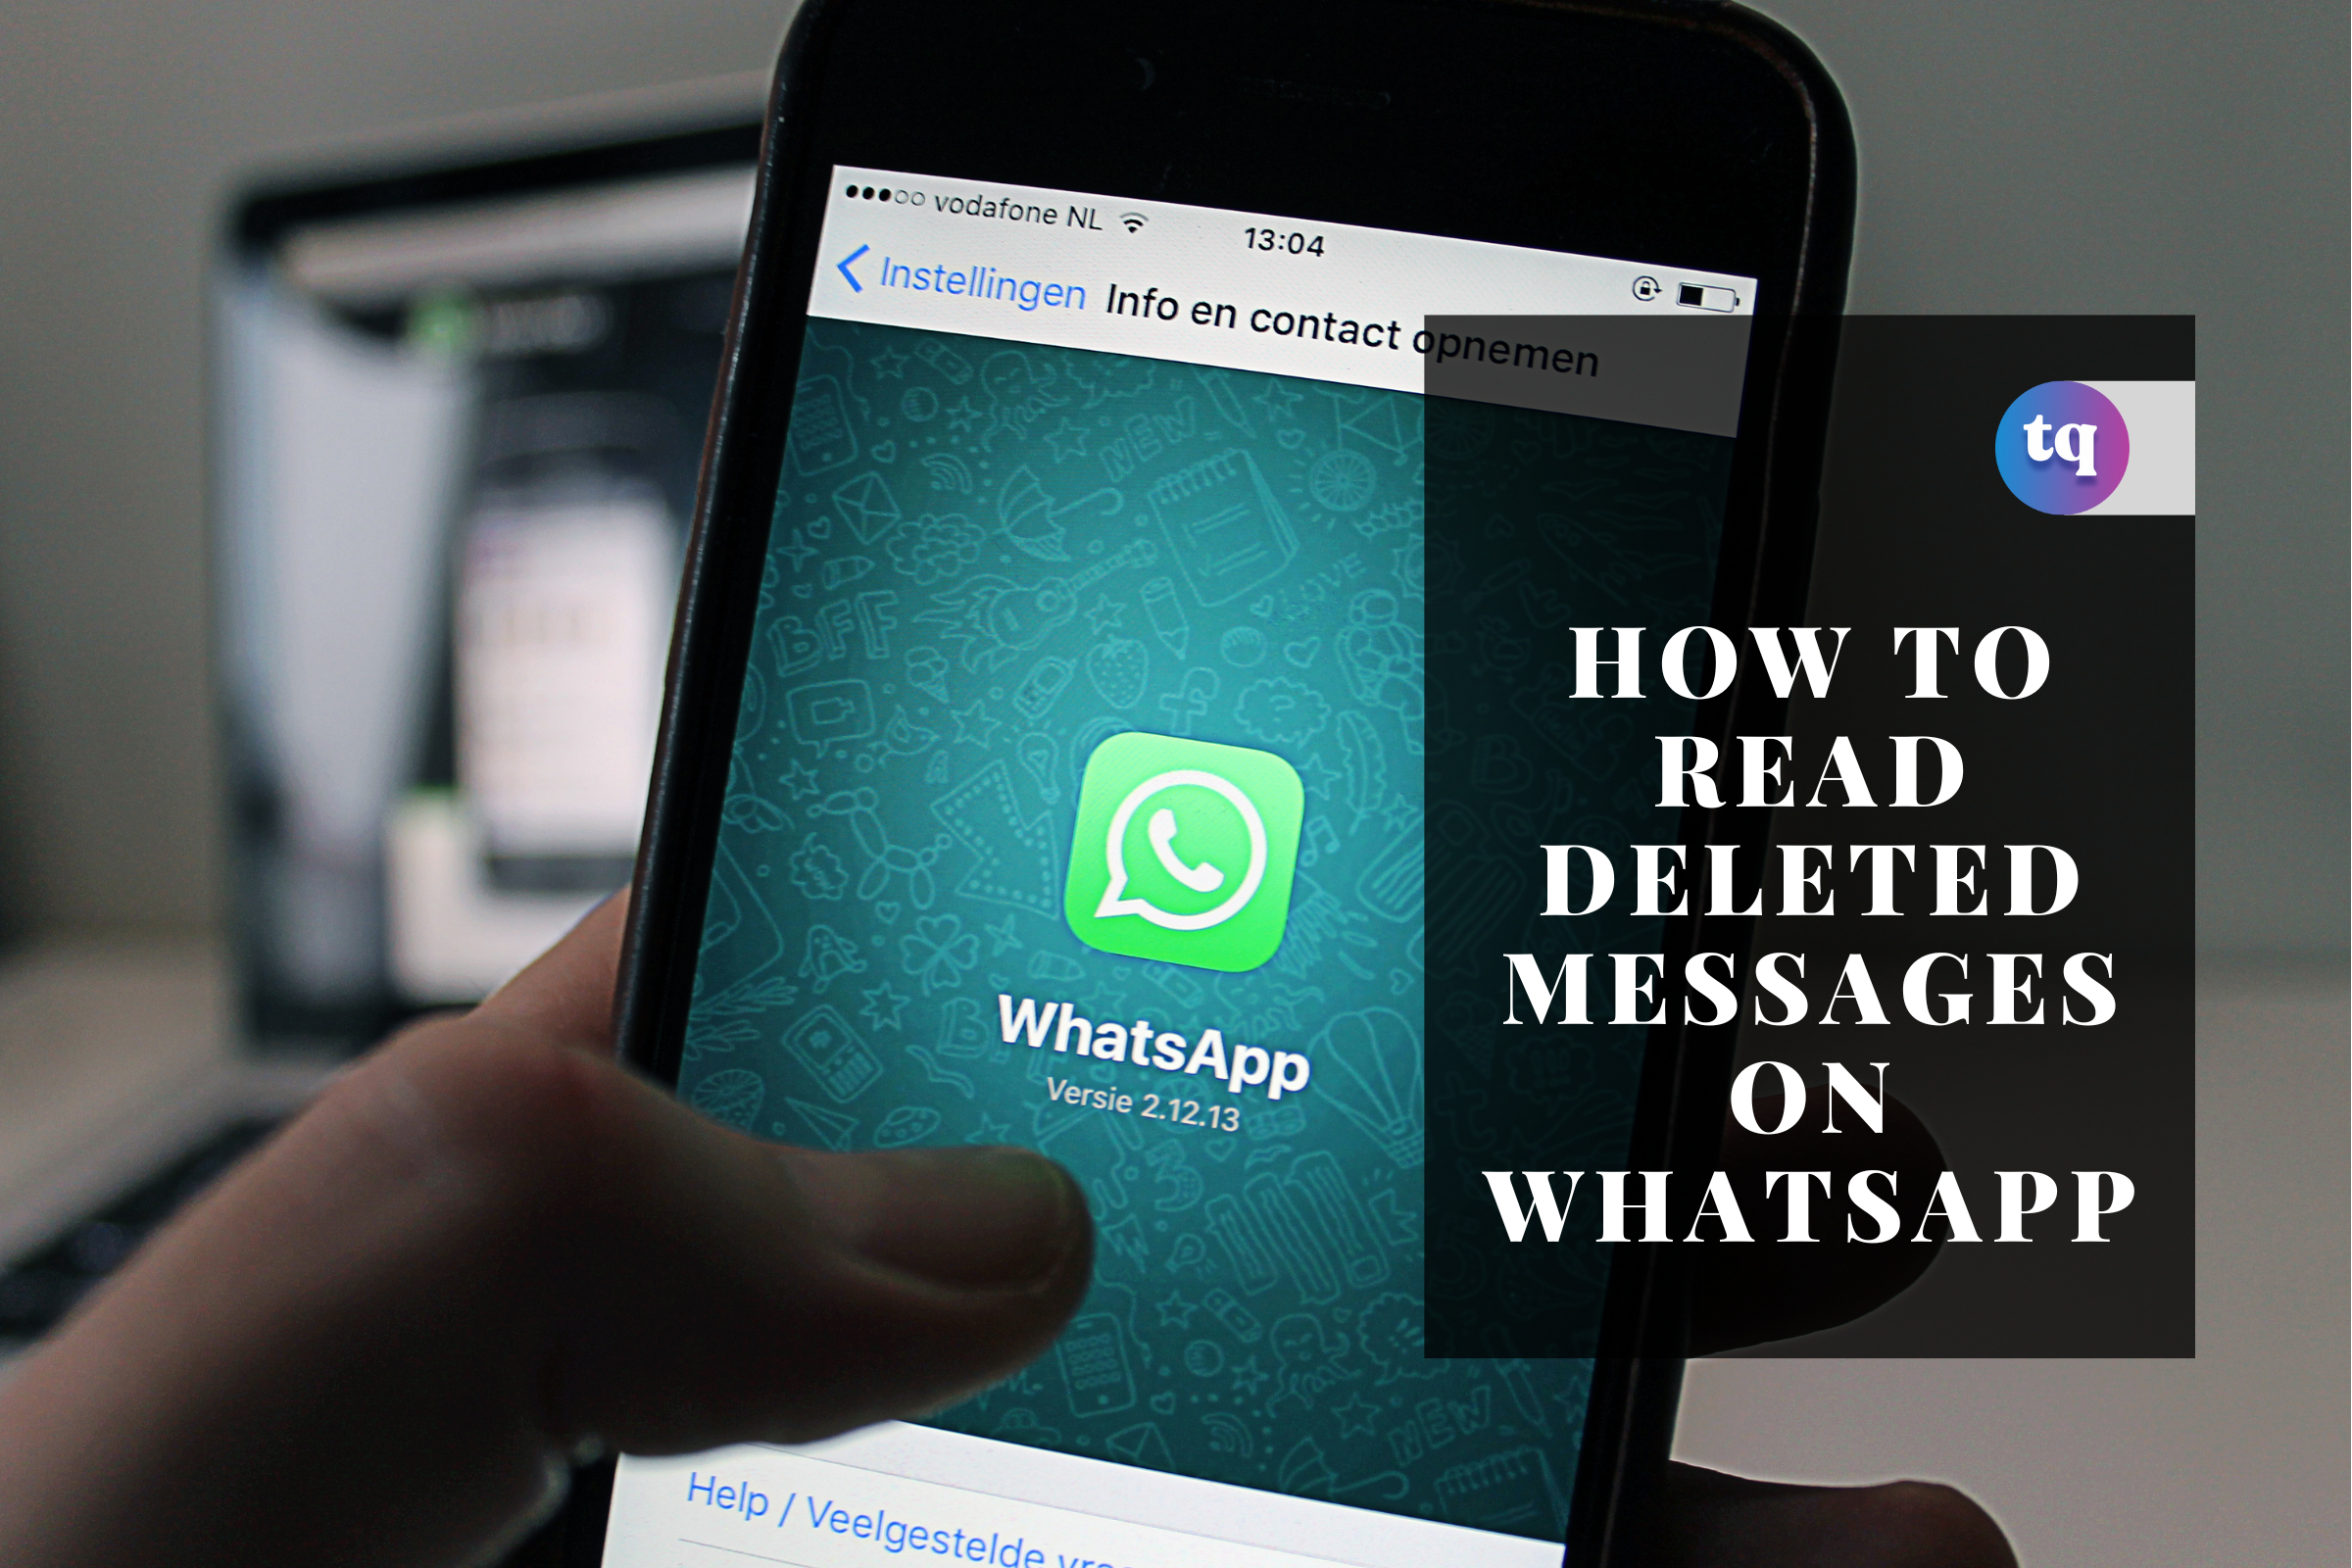 How to Read Deleted Messages On Whatsapp